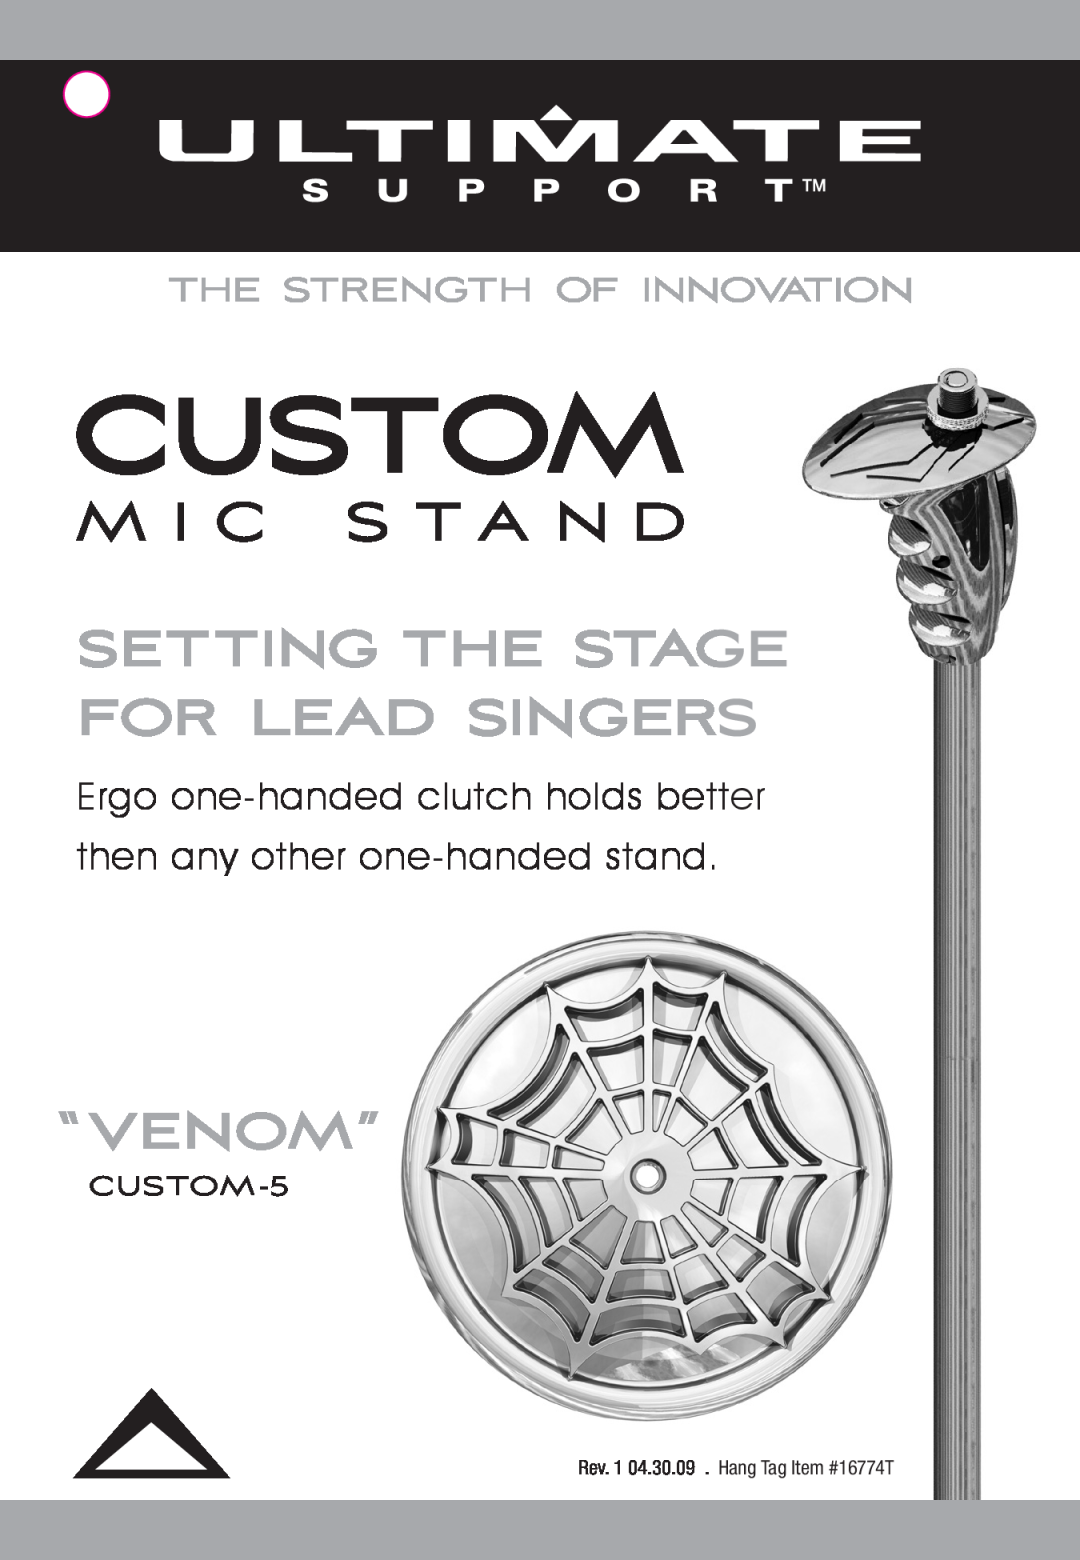 Ultimate Support Systems 16774T manual Setting The Stage For Lead Singers, Venom”, CUSTOM-5 